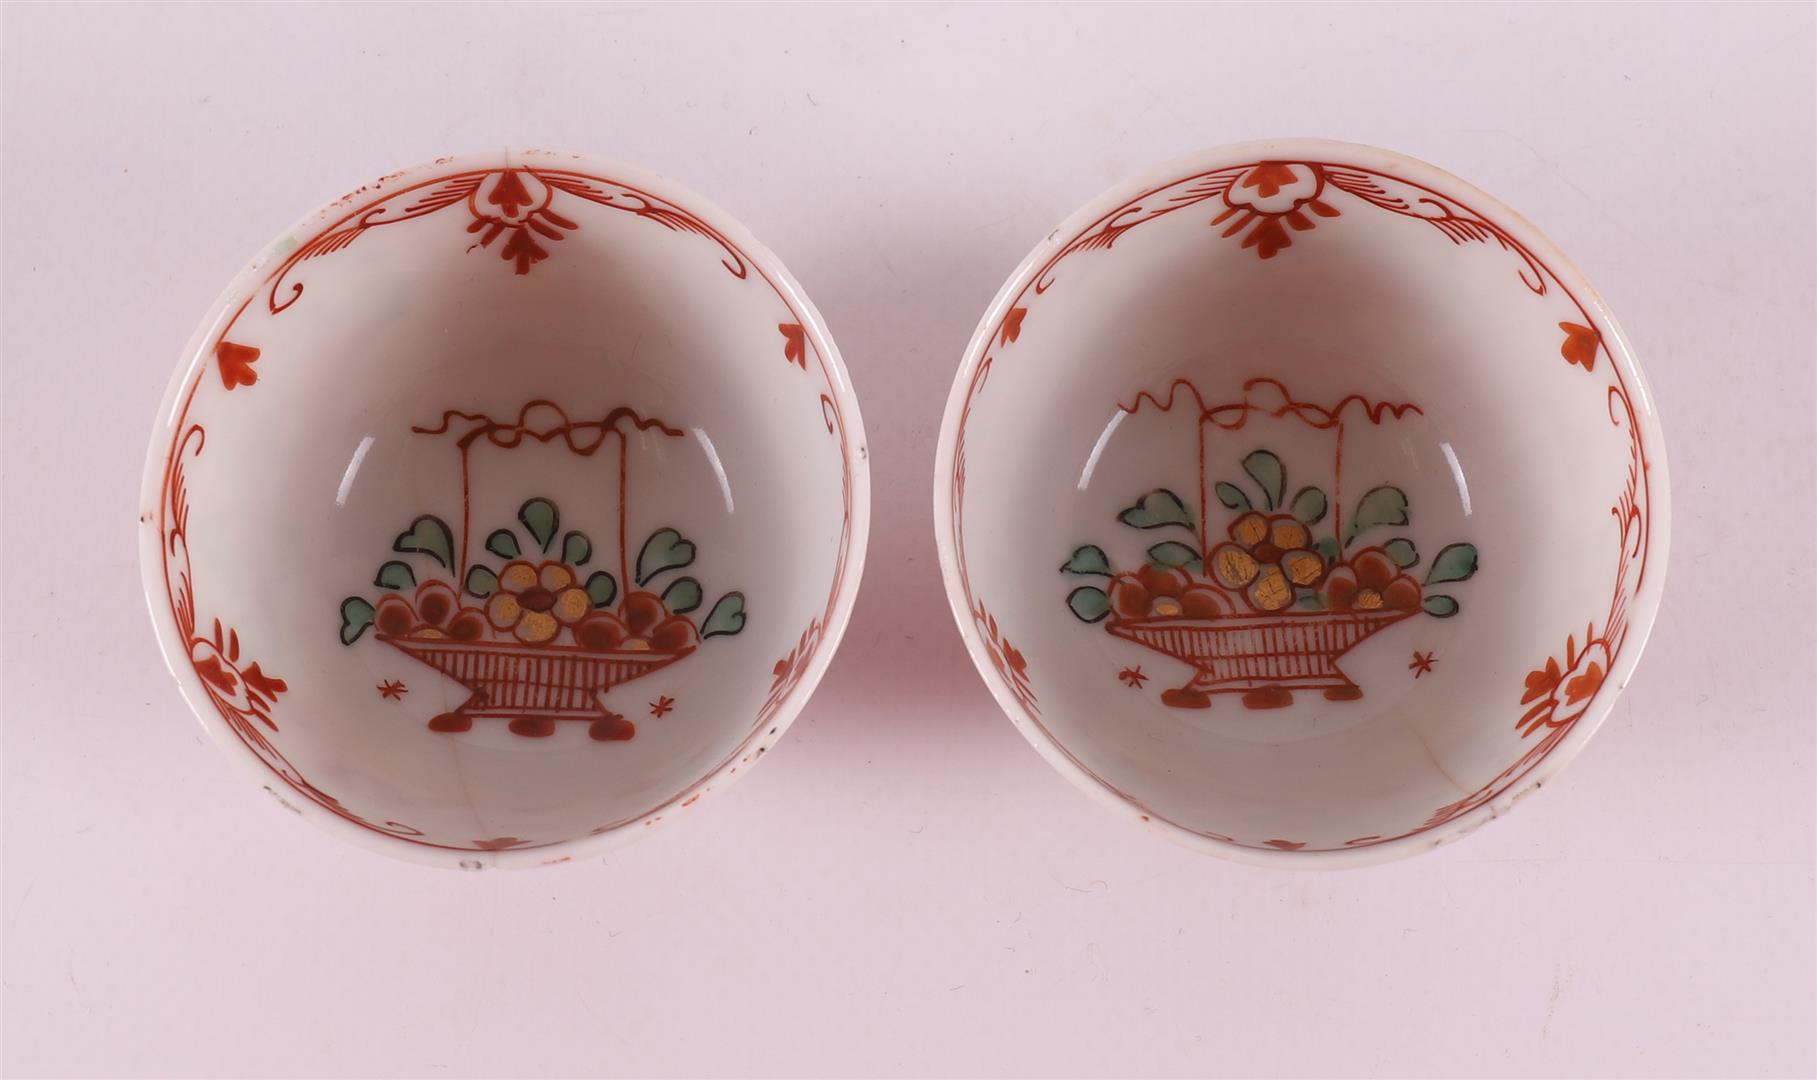 An Amsterdam colorful porcelain bowl, China, Qianglong, 18th century. Polychrome decoration of - Image 18 of 20